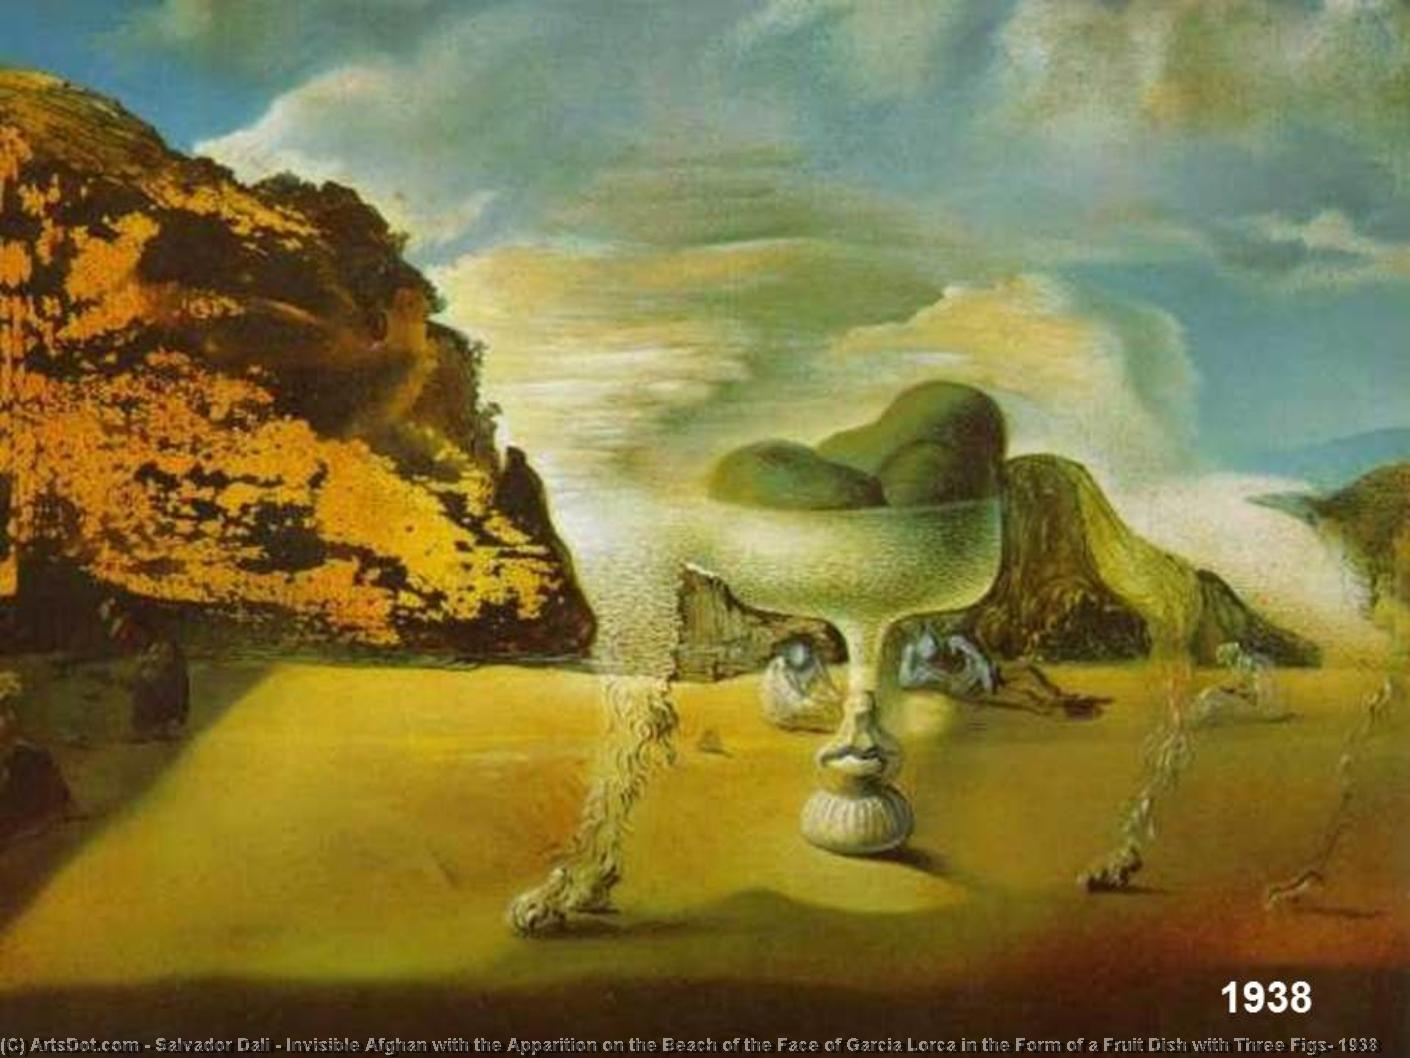 WikiOO.org - Güzel Sanatlar Ansiklopedisi - Resim, Resimler Salvador Dali - Invisible Afghan with the Apparition on the Beach of the Face of Garcia Lorca in the Form of a Fruit Dish with Three Figs, 1938